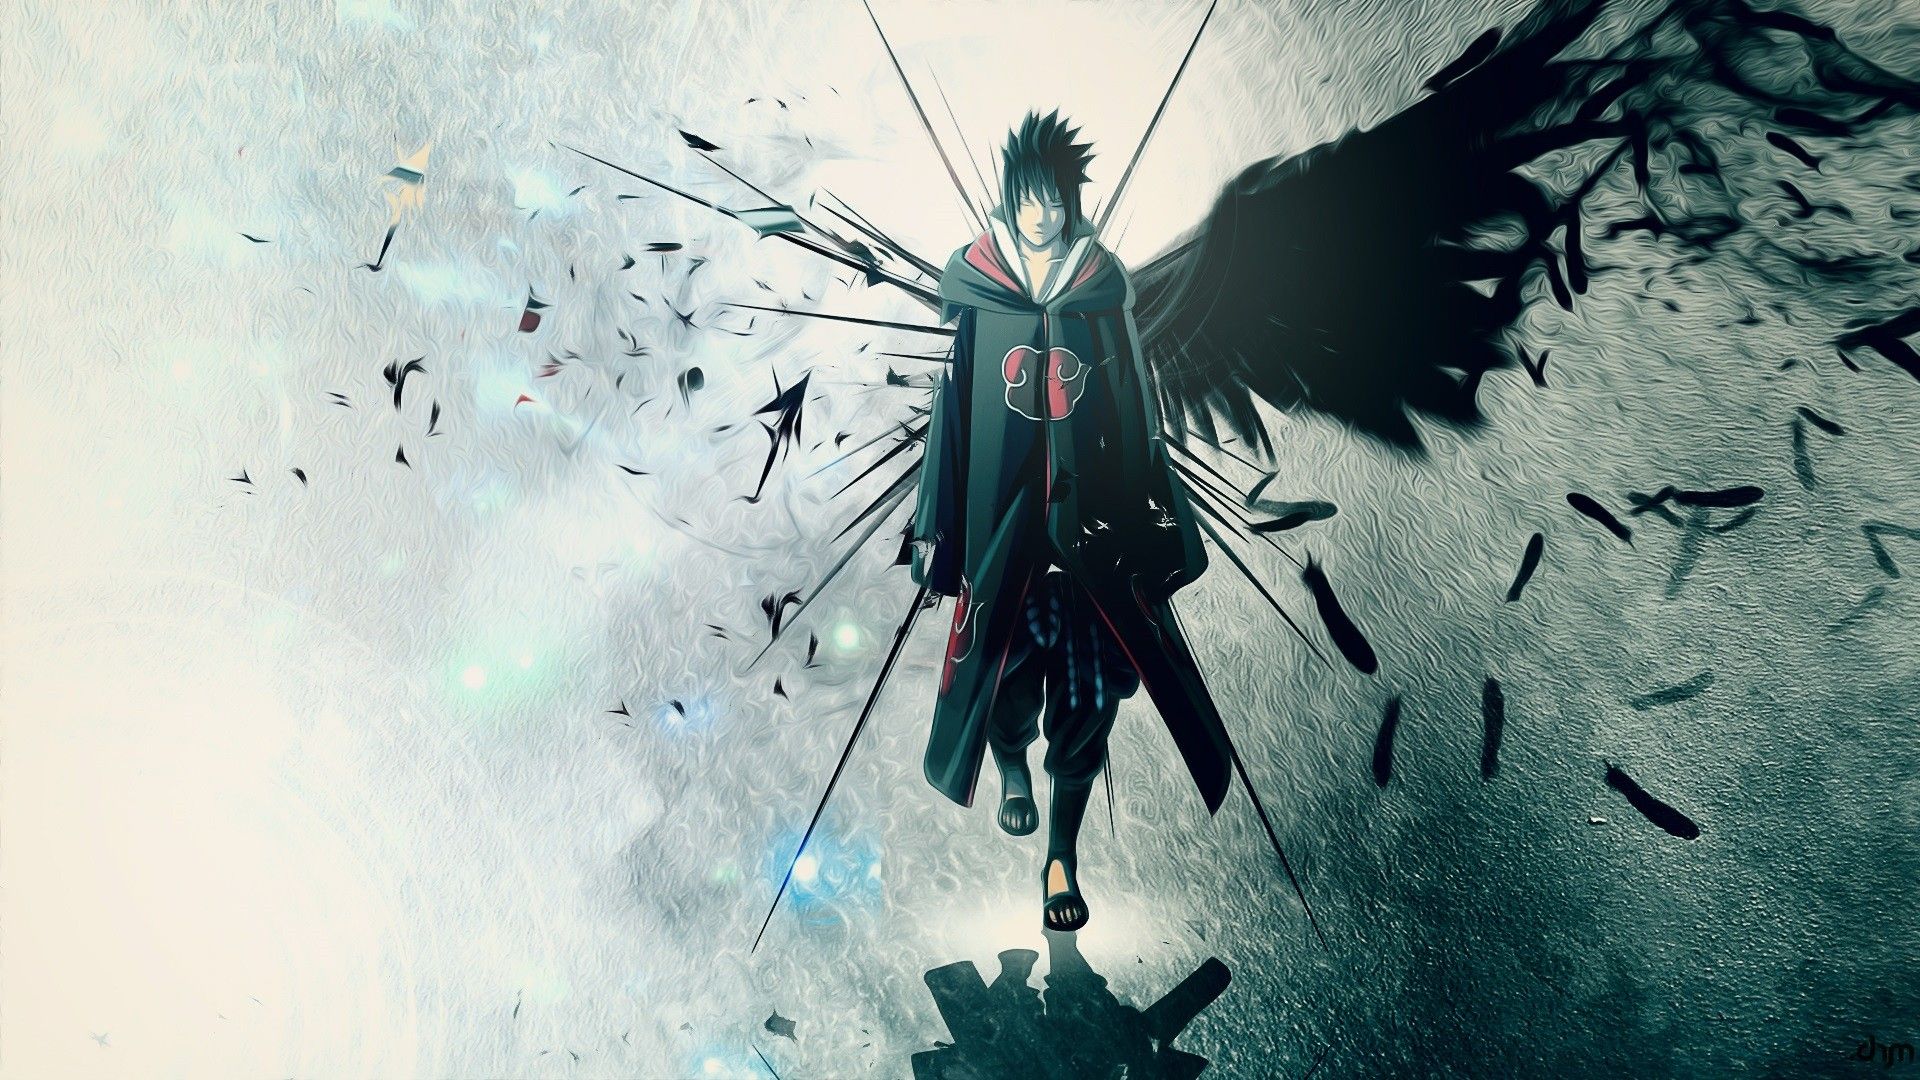 A captivating anime wallpaper featuring Sasuke Uchiha, the embodiment of vengeance, wielding a sword with majestic wings.